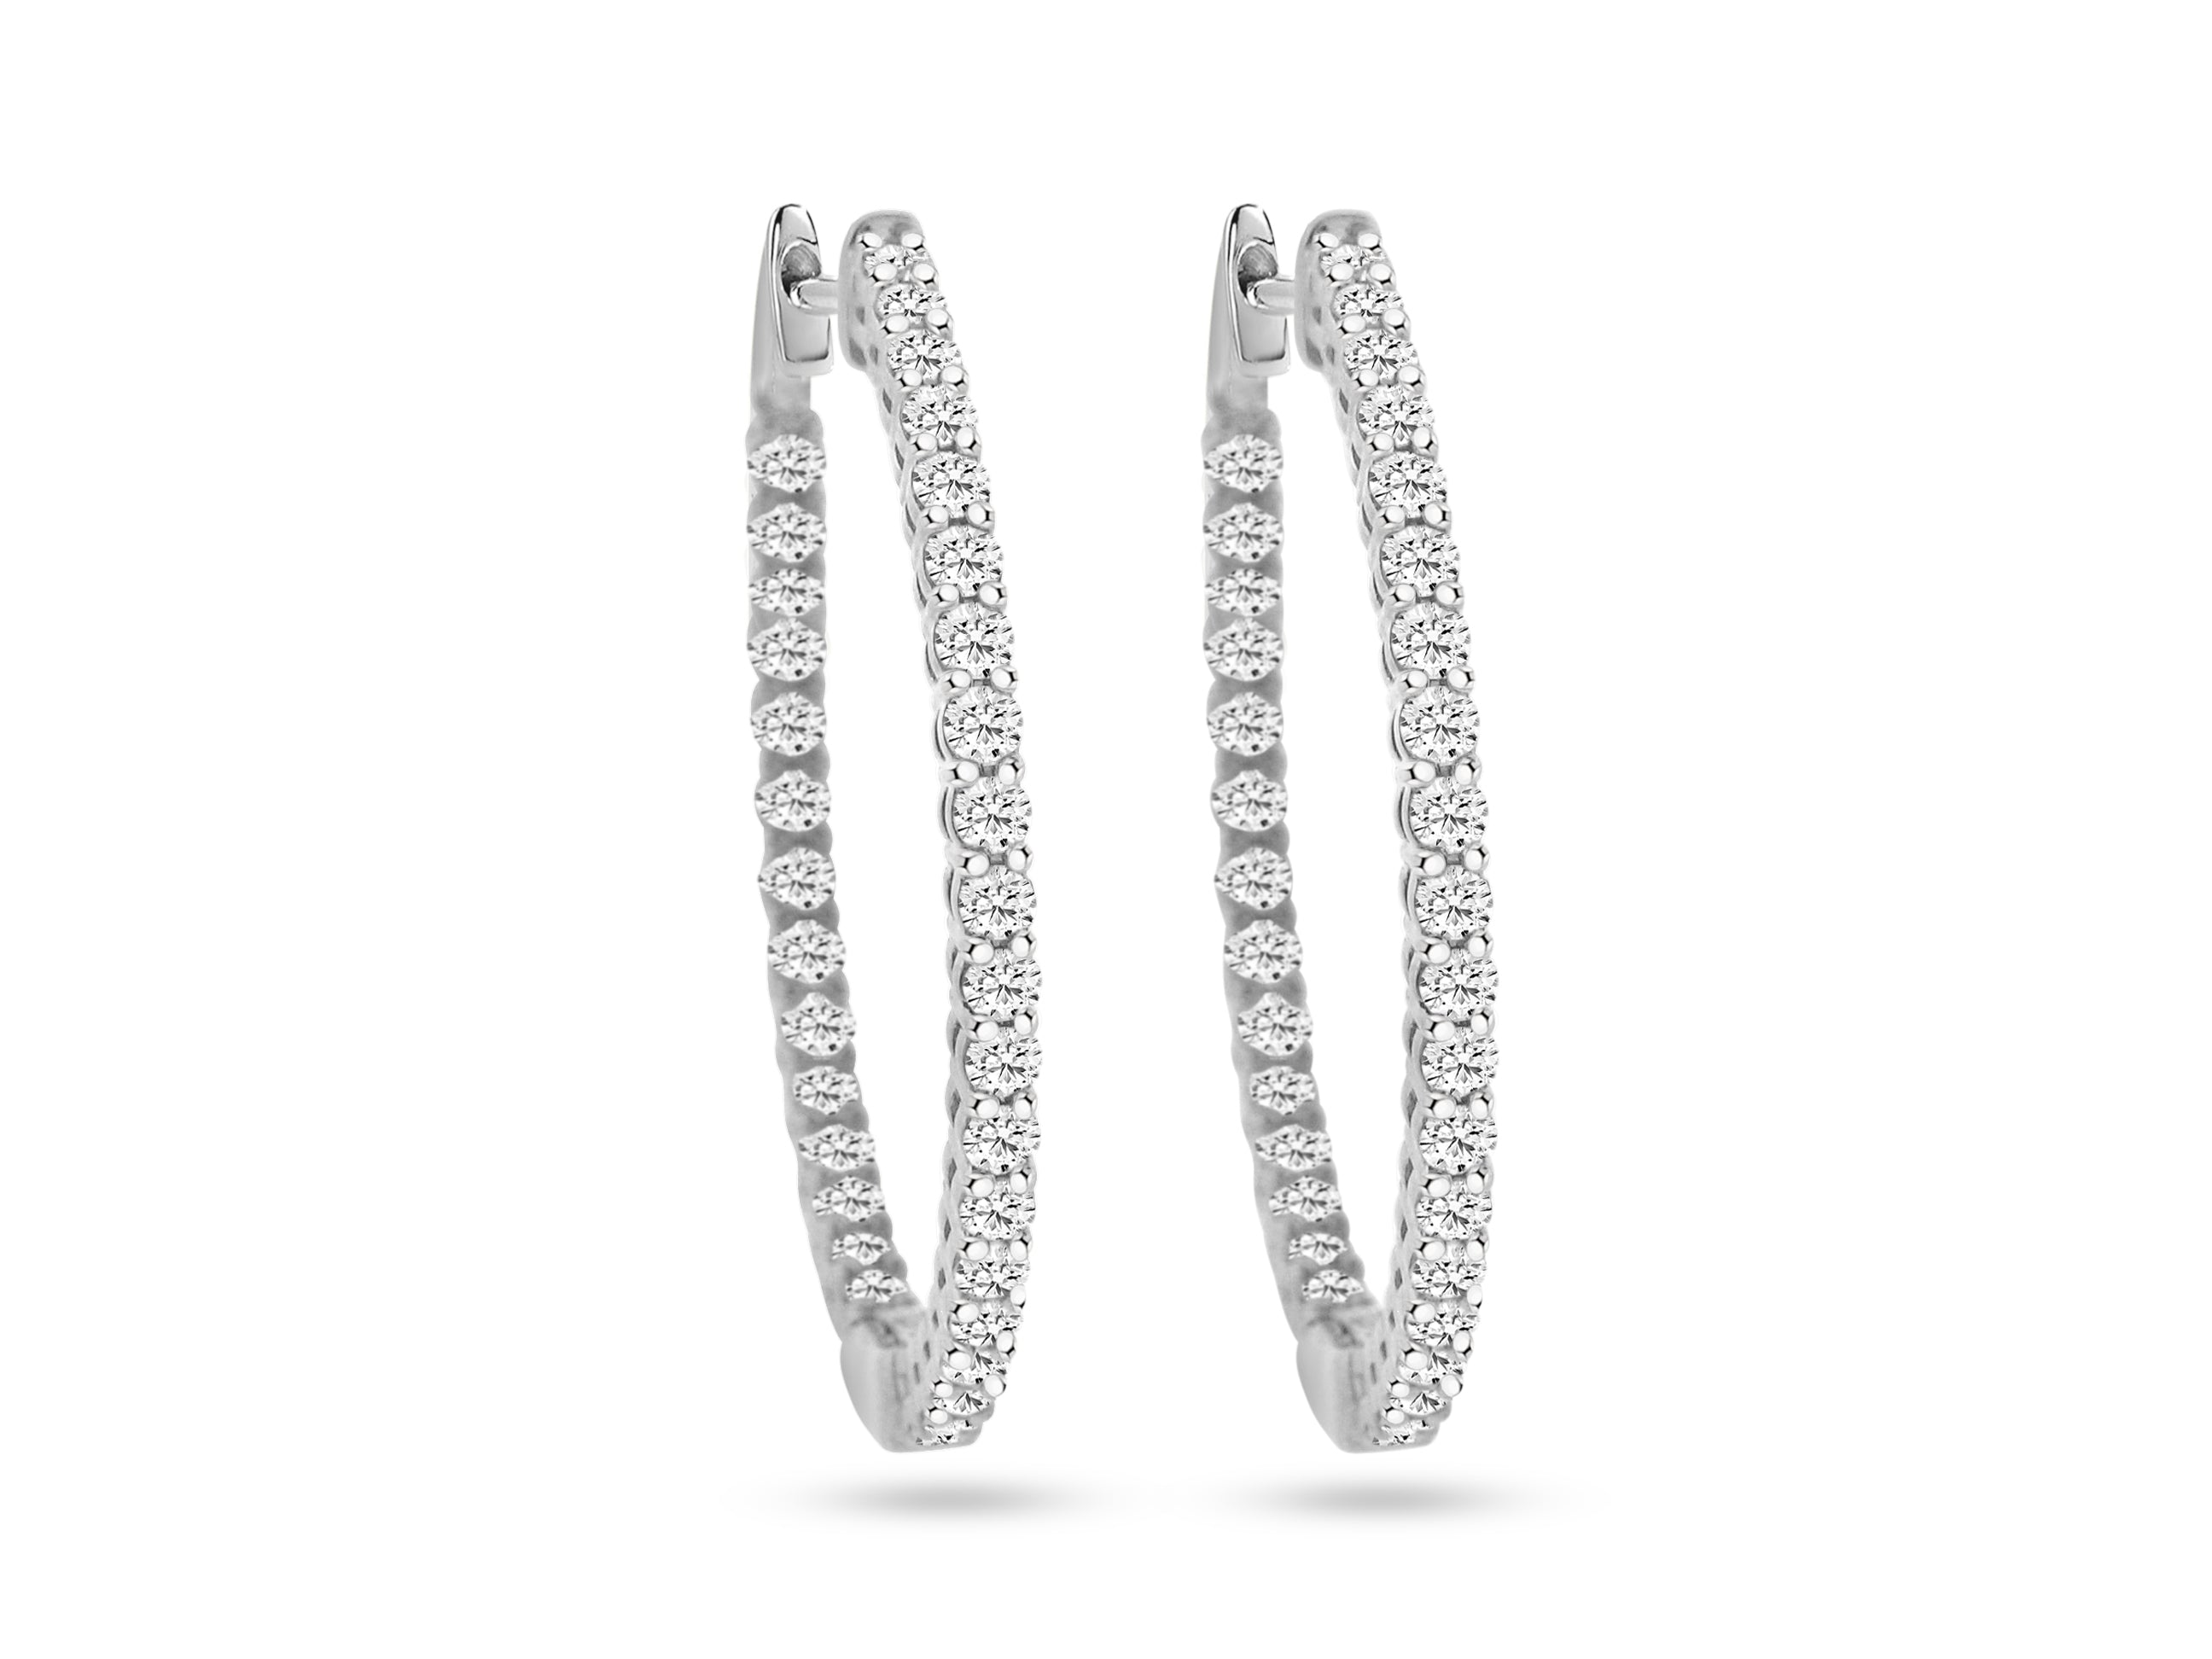 MULLOYS PRIVE'14K WHITE GOLD 2.99CT SI CLARITY G-H COLOR DIAMOND HOOPS